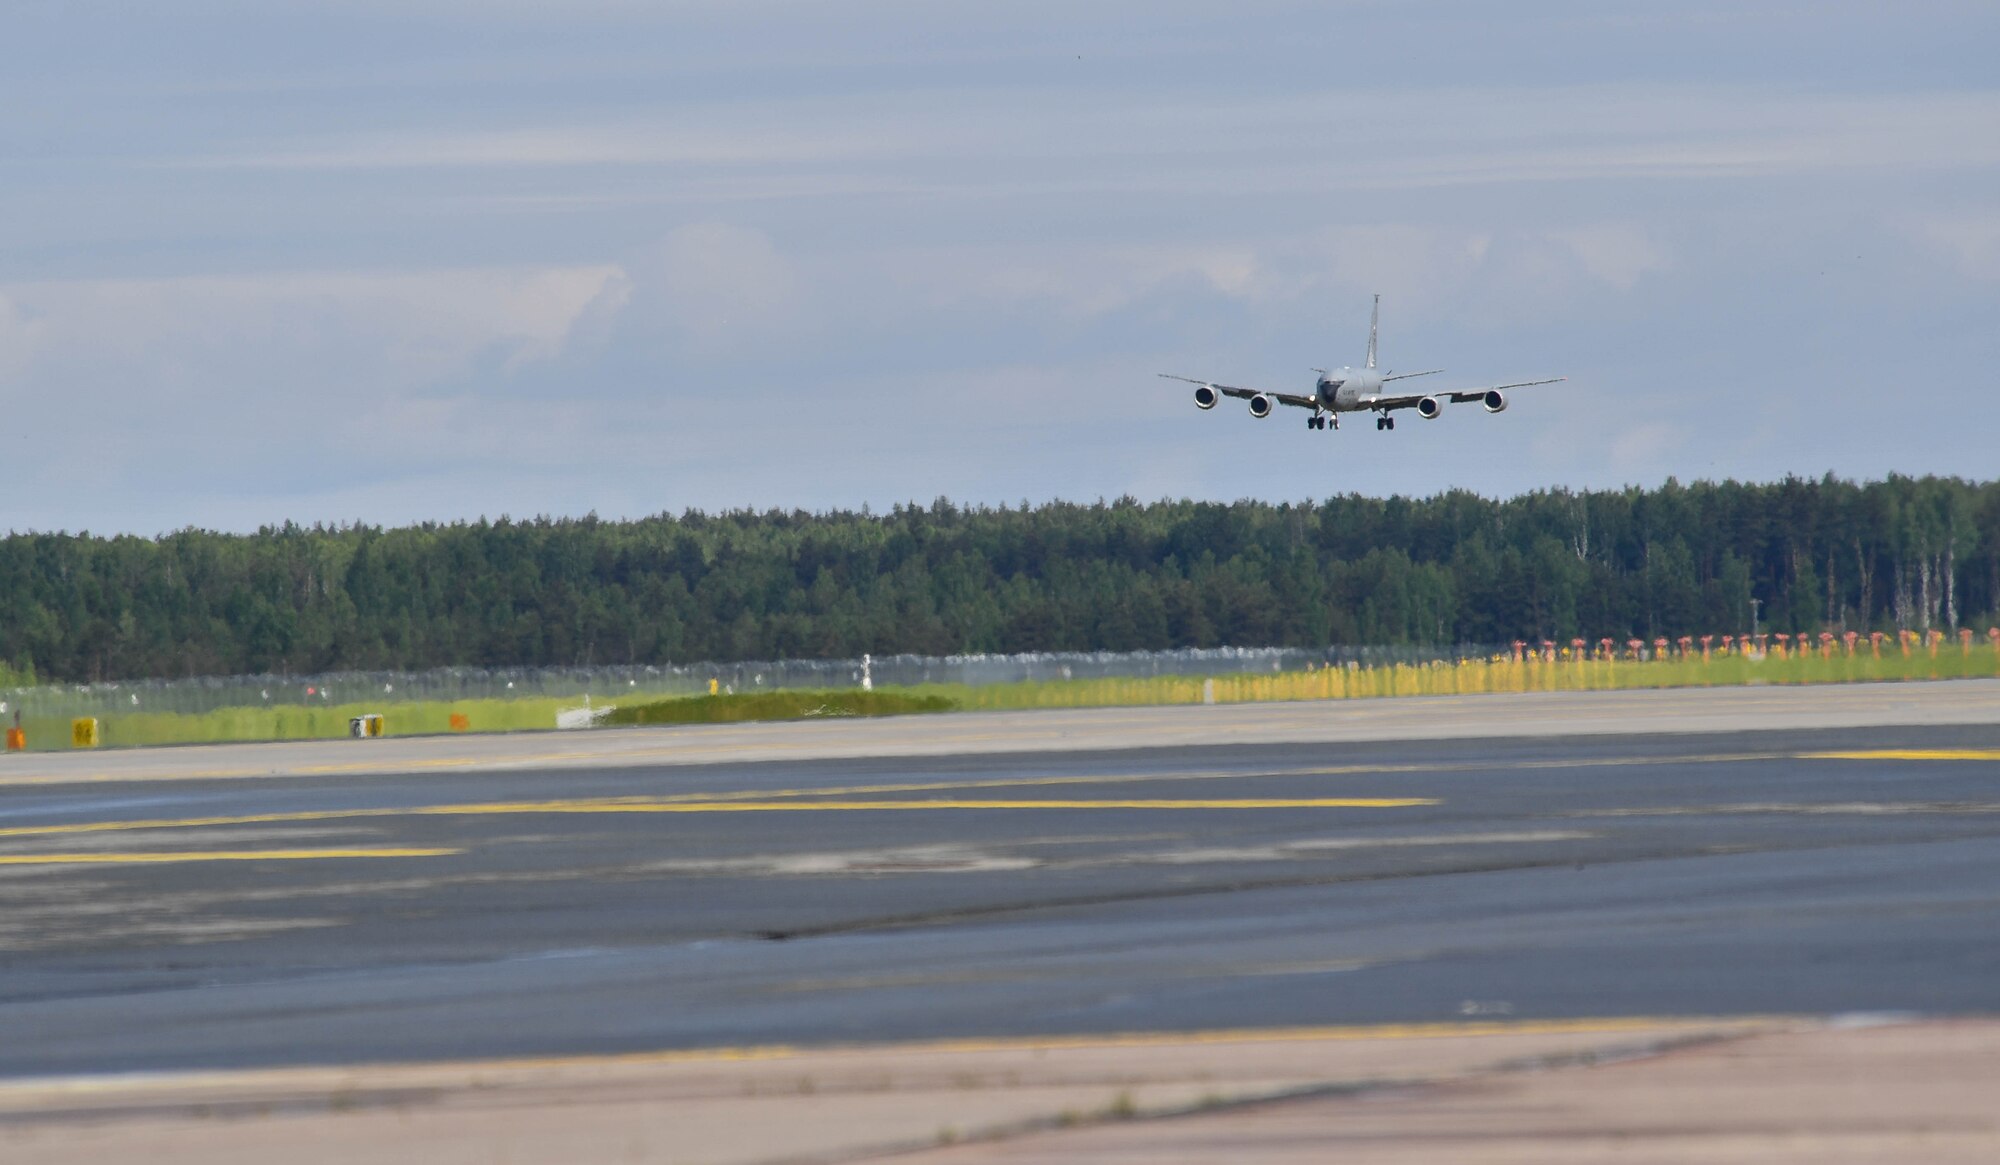 A Michigan Air National Guard KC-135 Stratotanker descends onto Riga International Airport, Latvia, for exercise Saber Strike 17 June 4, 2017. Two KC-135s flying out of Selfridge Air National Guard Base, Mich., landed at the airport carrying approximately 50 Airmen to participate in Saber Strike 2017. (U.S Air Force photo by Senior Airman Tryphena Mayhugh)